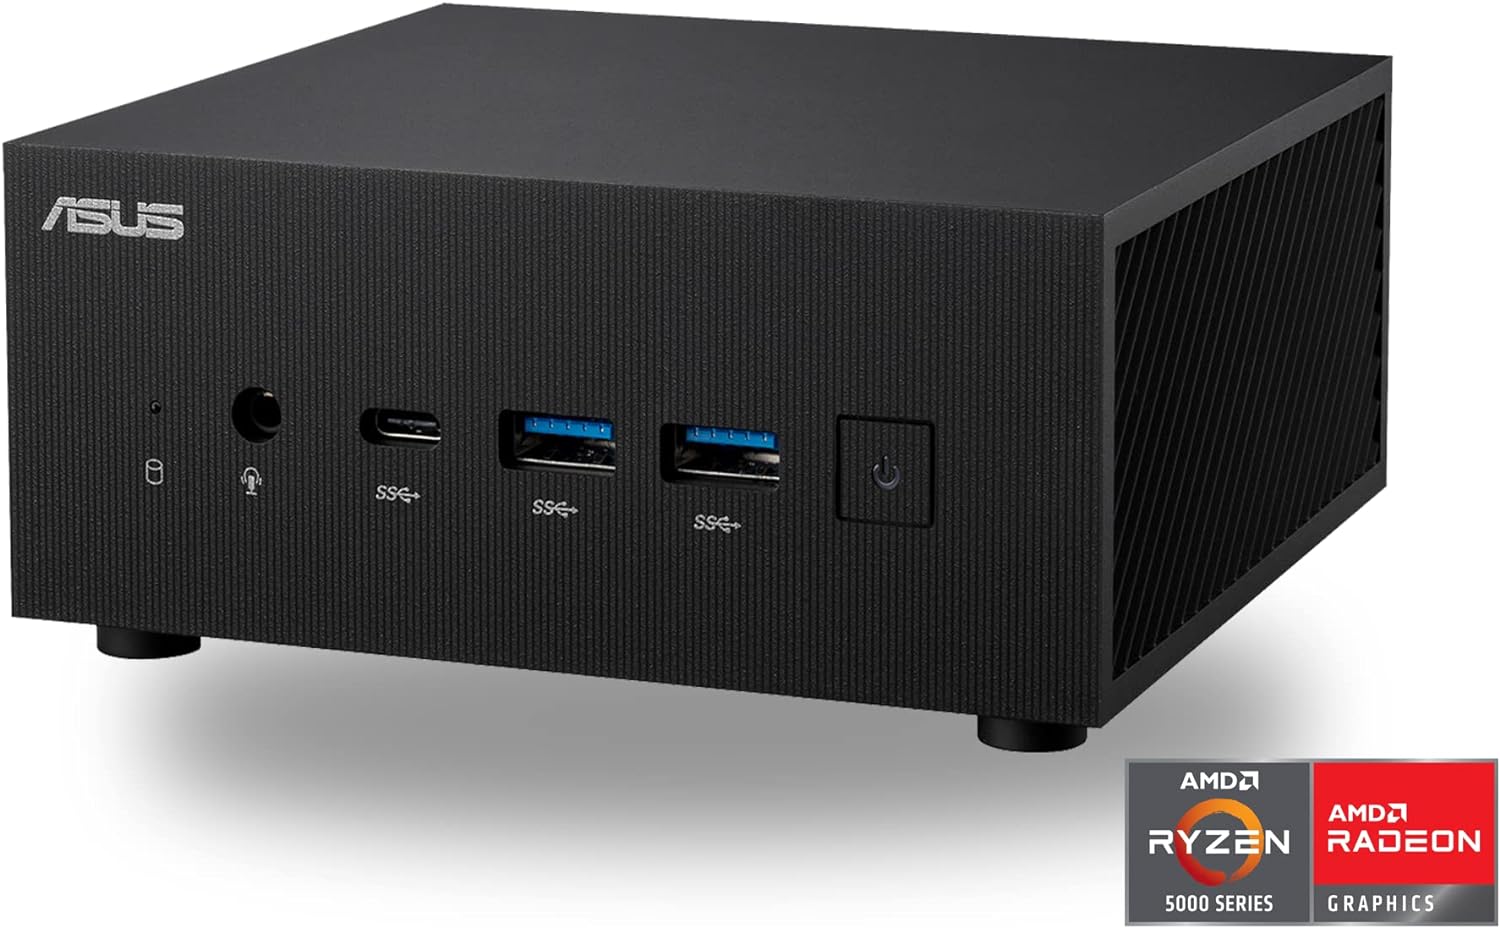 ASUS Ultra-Compact Mini PC with AMD Ryzen 5000H Series Processors and AMD Radeon Graphics, Supports Quad-4K displays and 8K Resolution, 2X PCIe Gen3 x4 M.2 NVMe SSD, 2.5 Gb LAN, WiFi 6E